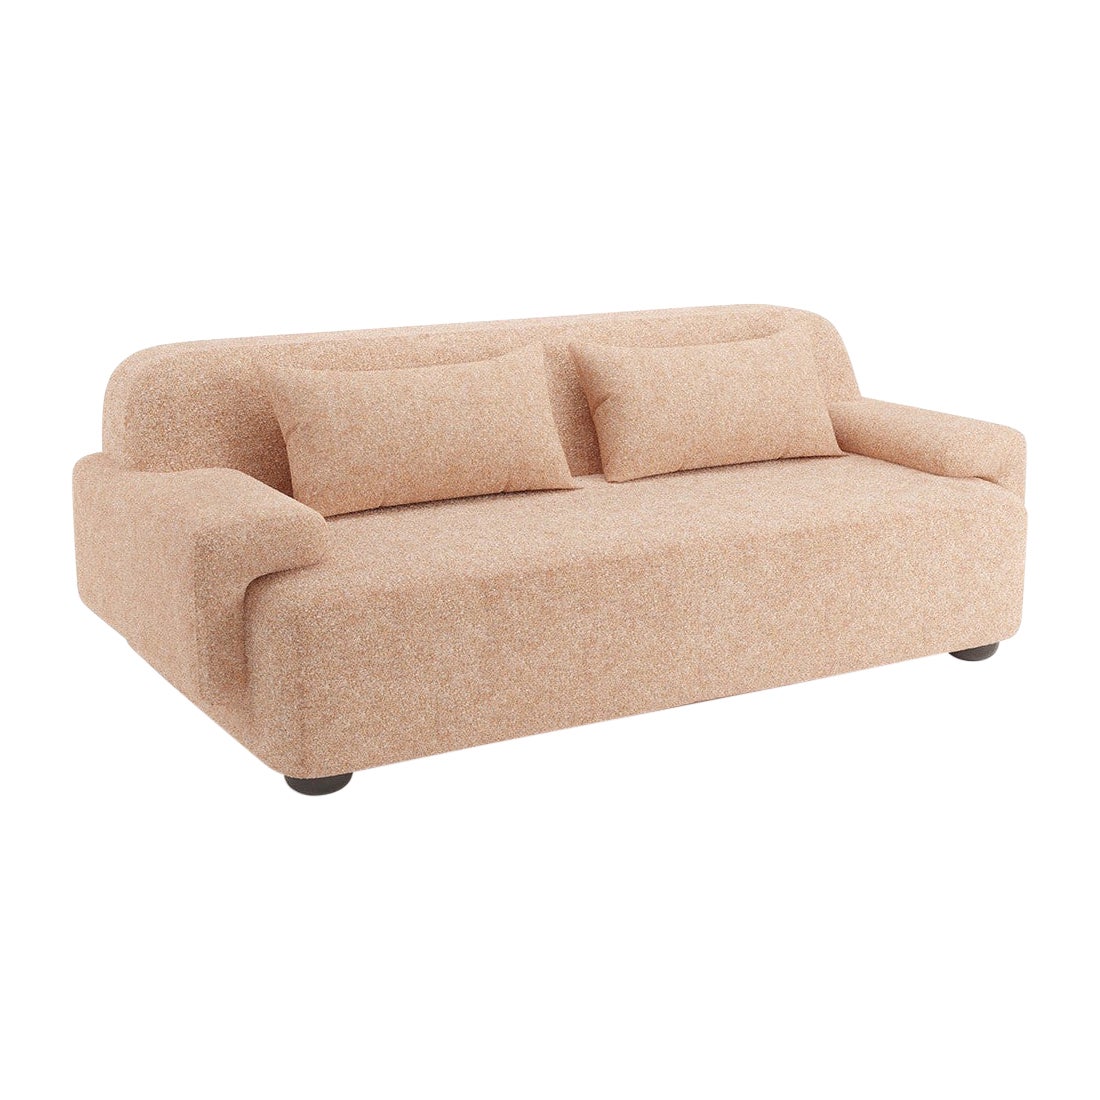 Popus Editions Lena 3 Seater Sofa in Nude Antwerp Linen Upholstery For Sale